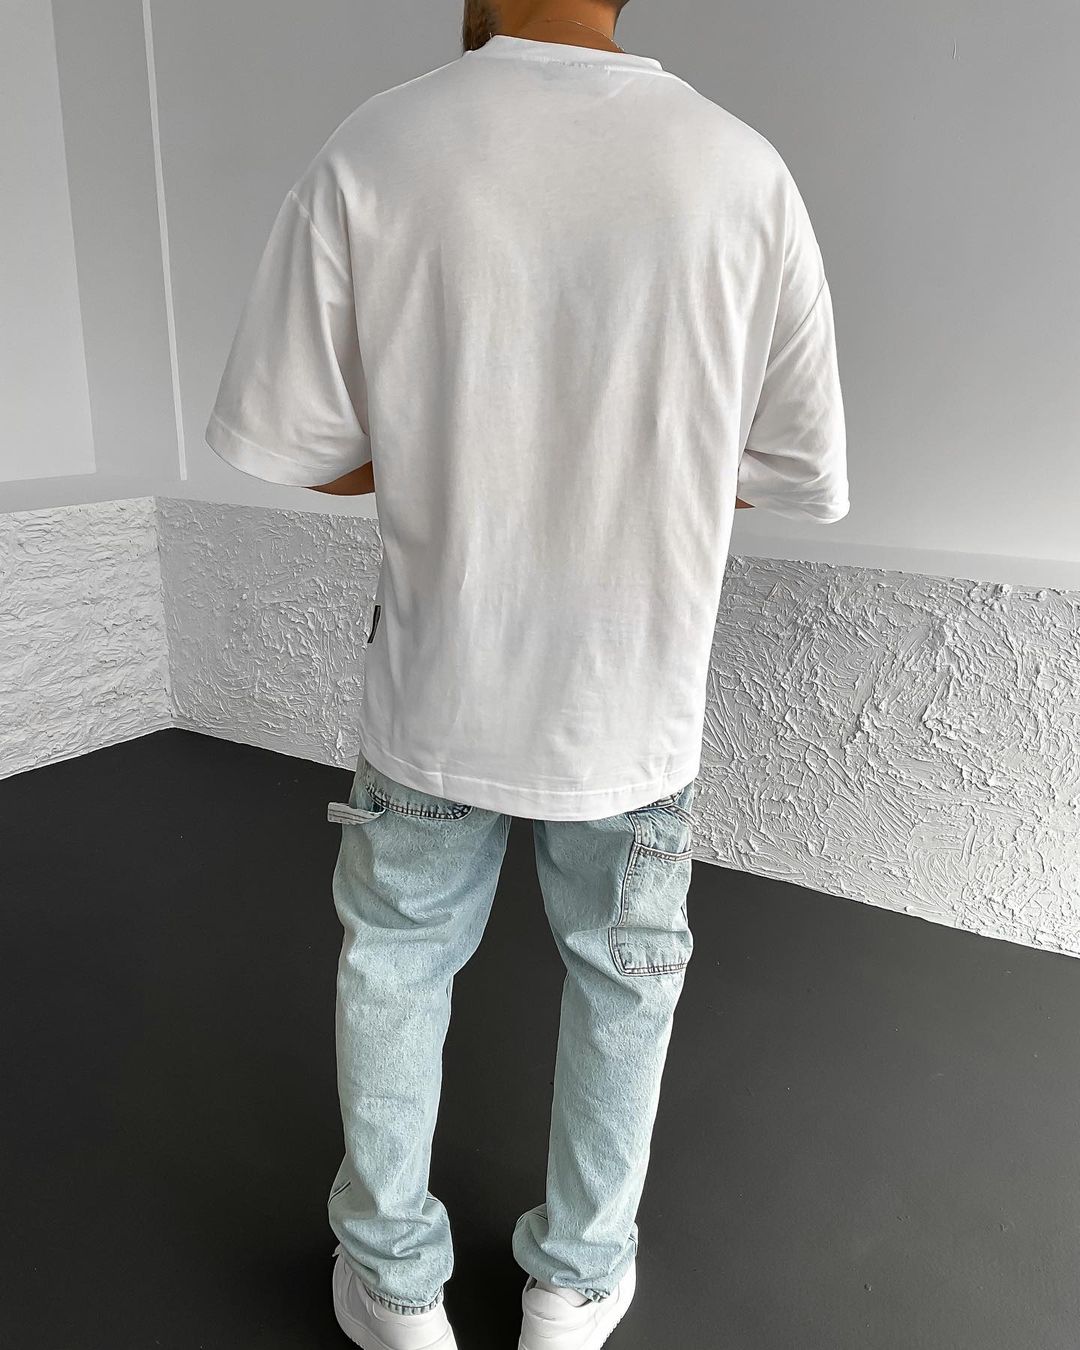 White "Slow Living" Printed Oversize T-Shirt